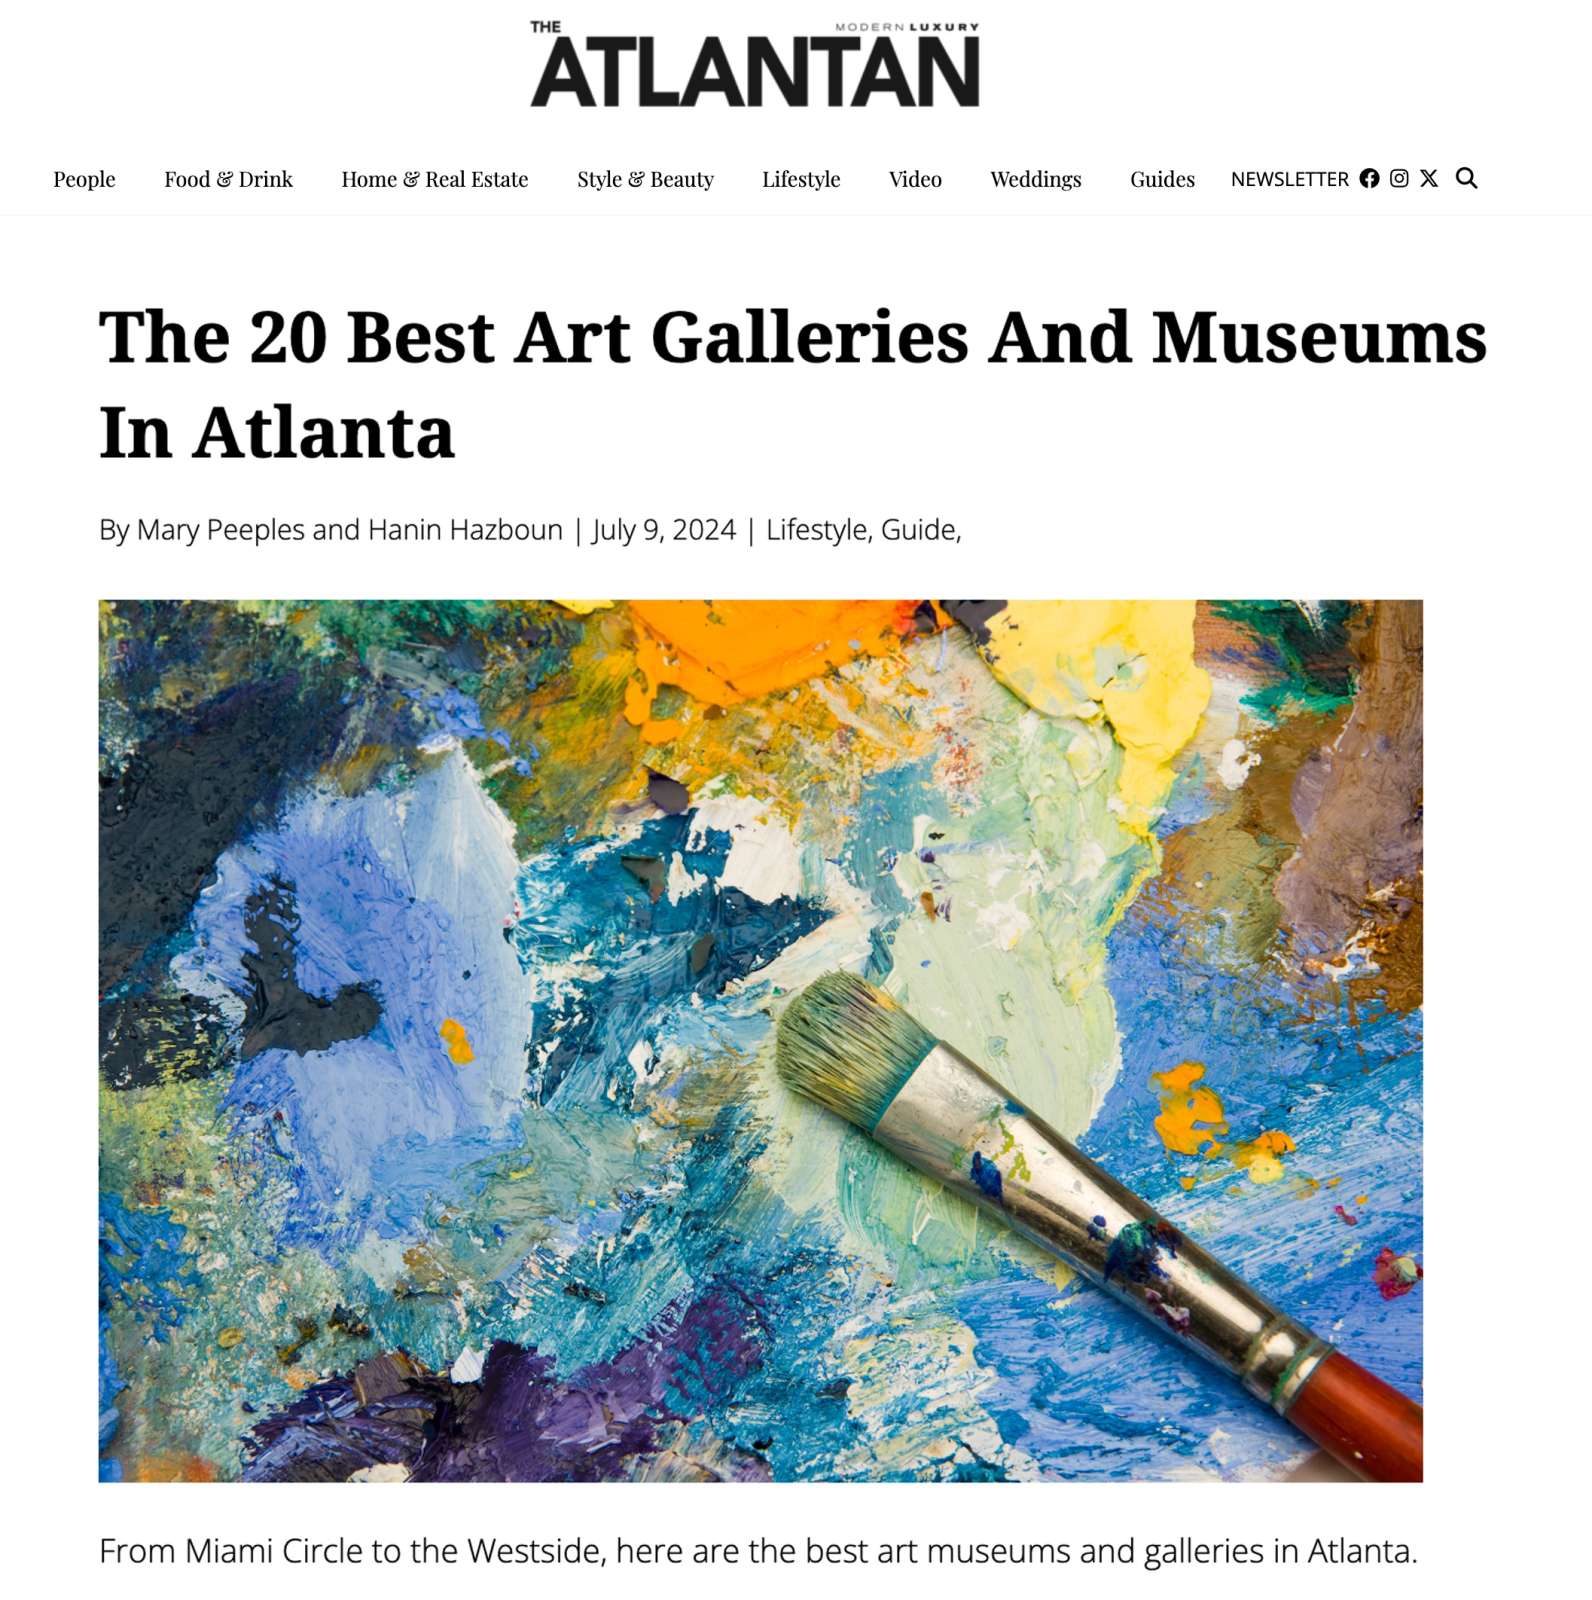 The 20 Best Art Galleries And Museums In Atlanta